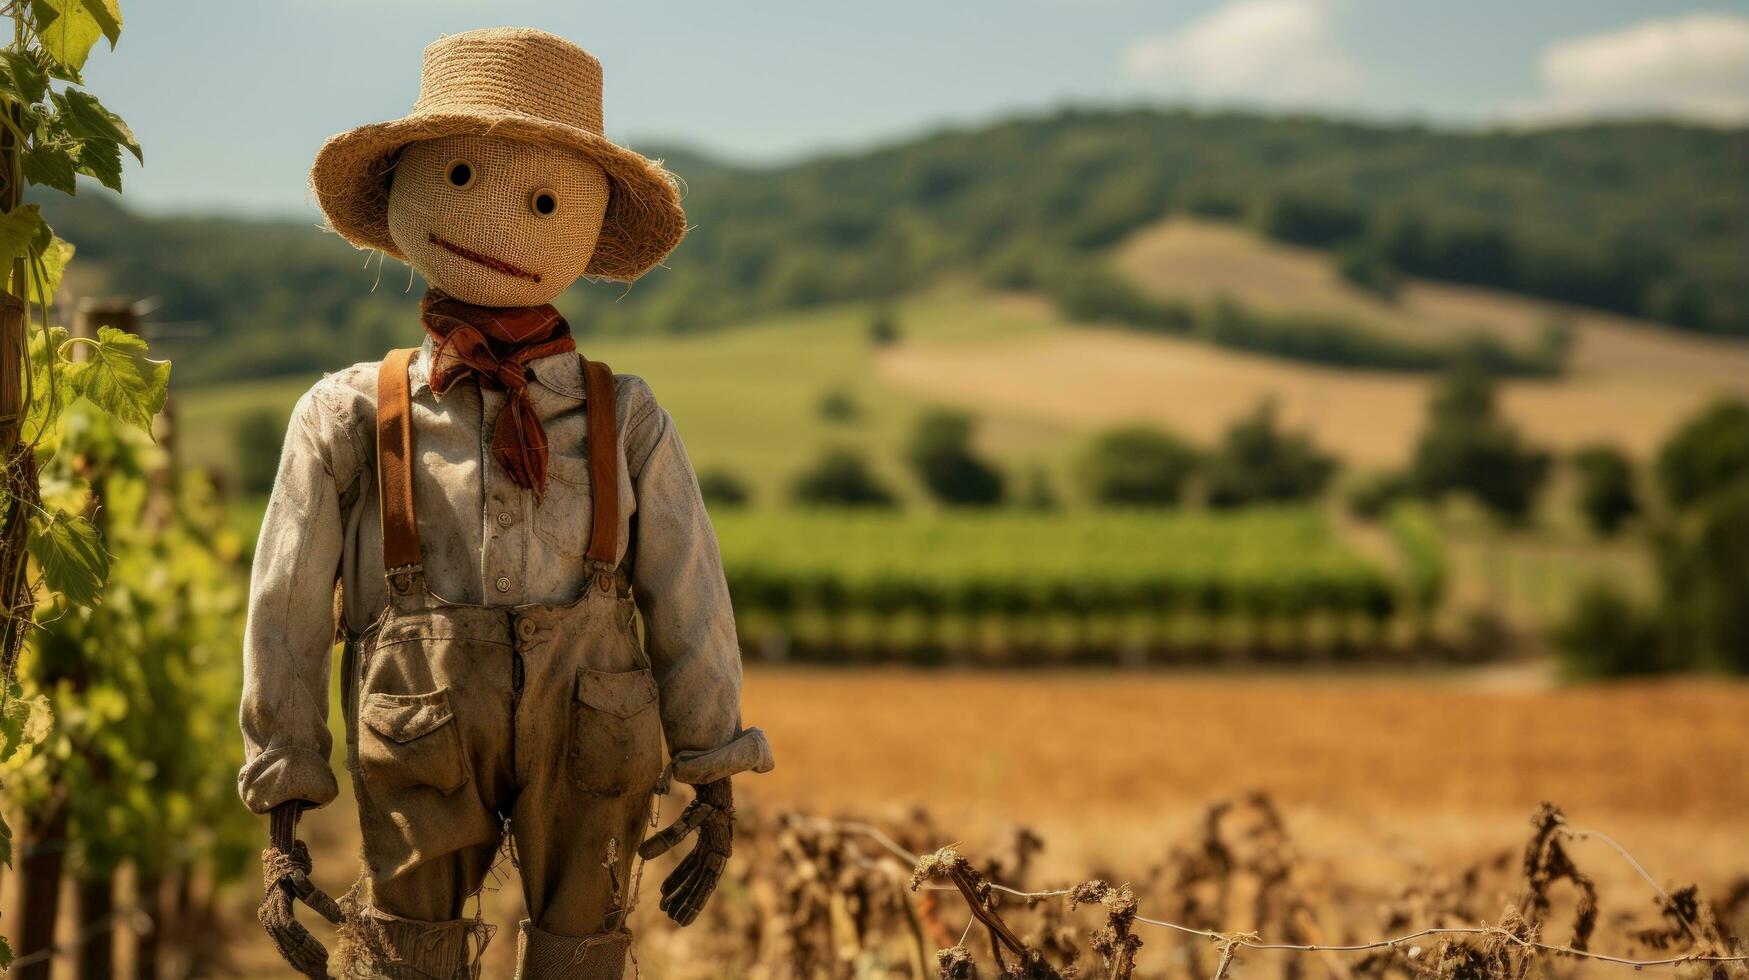 Scarecrow guarding the fields in the countryside. photo